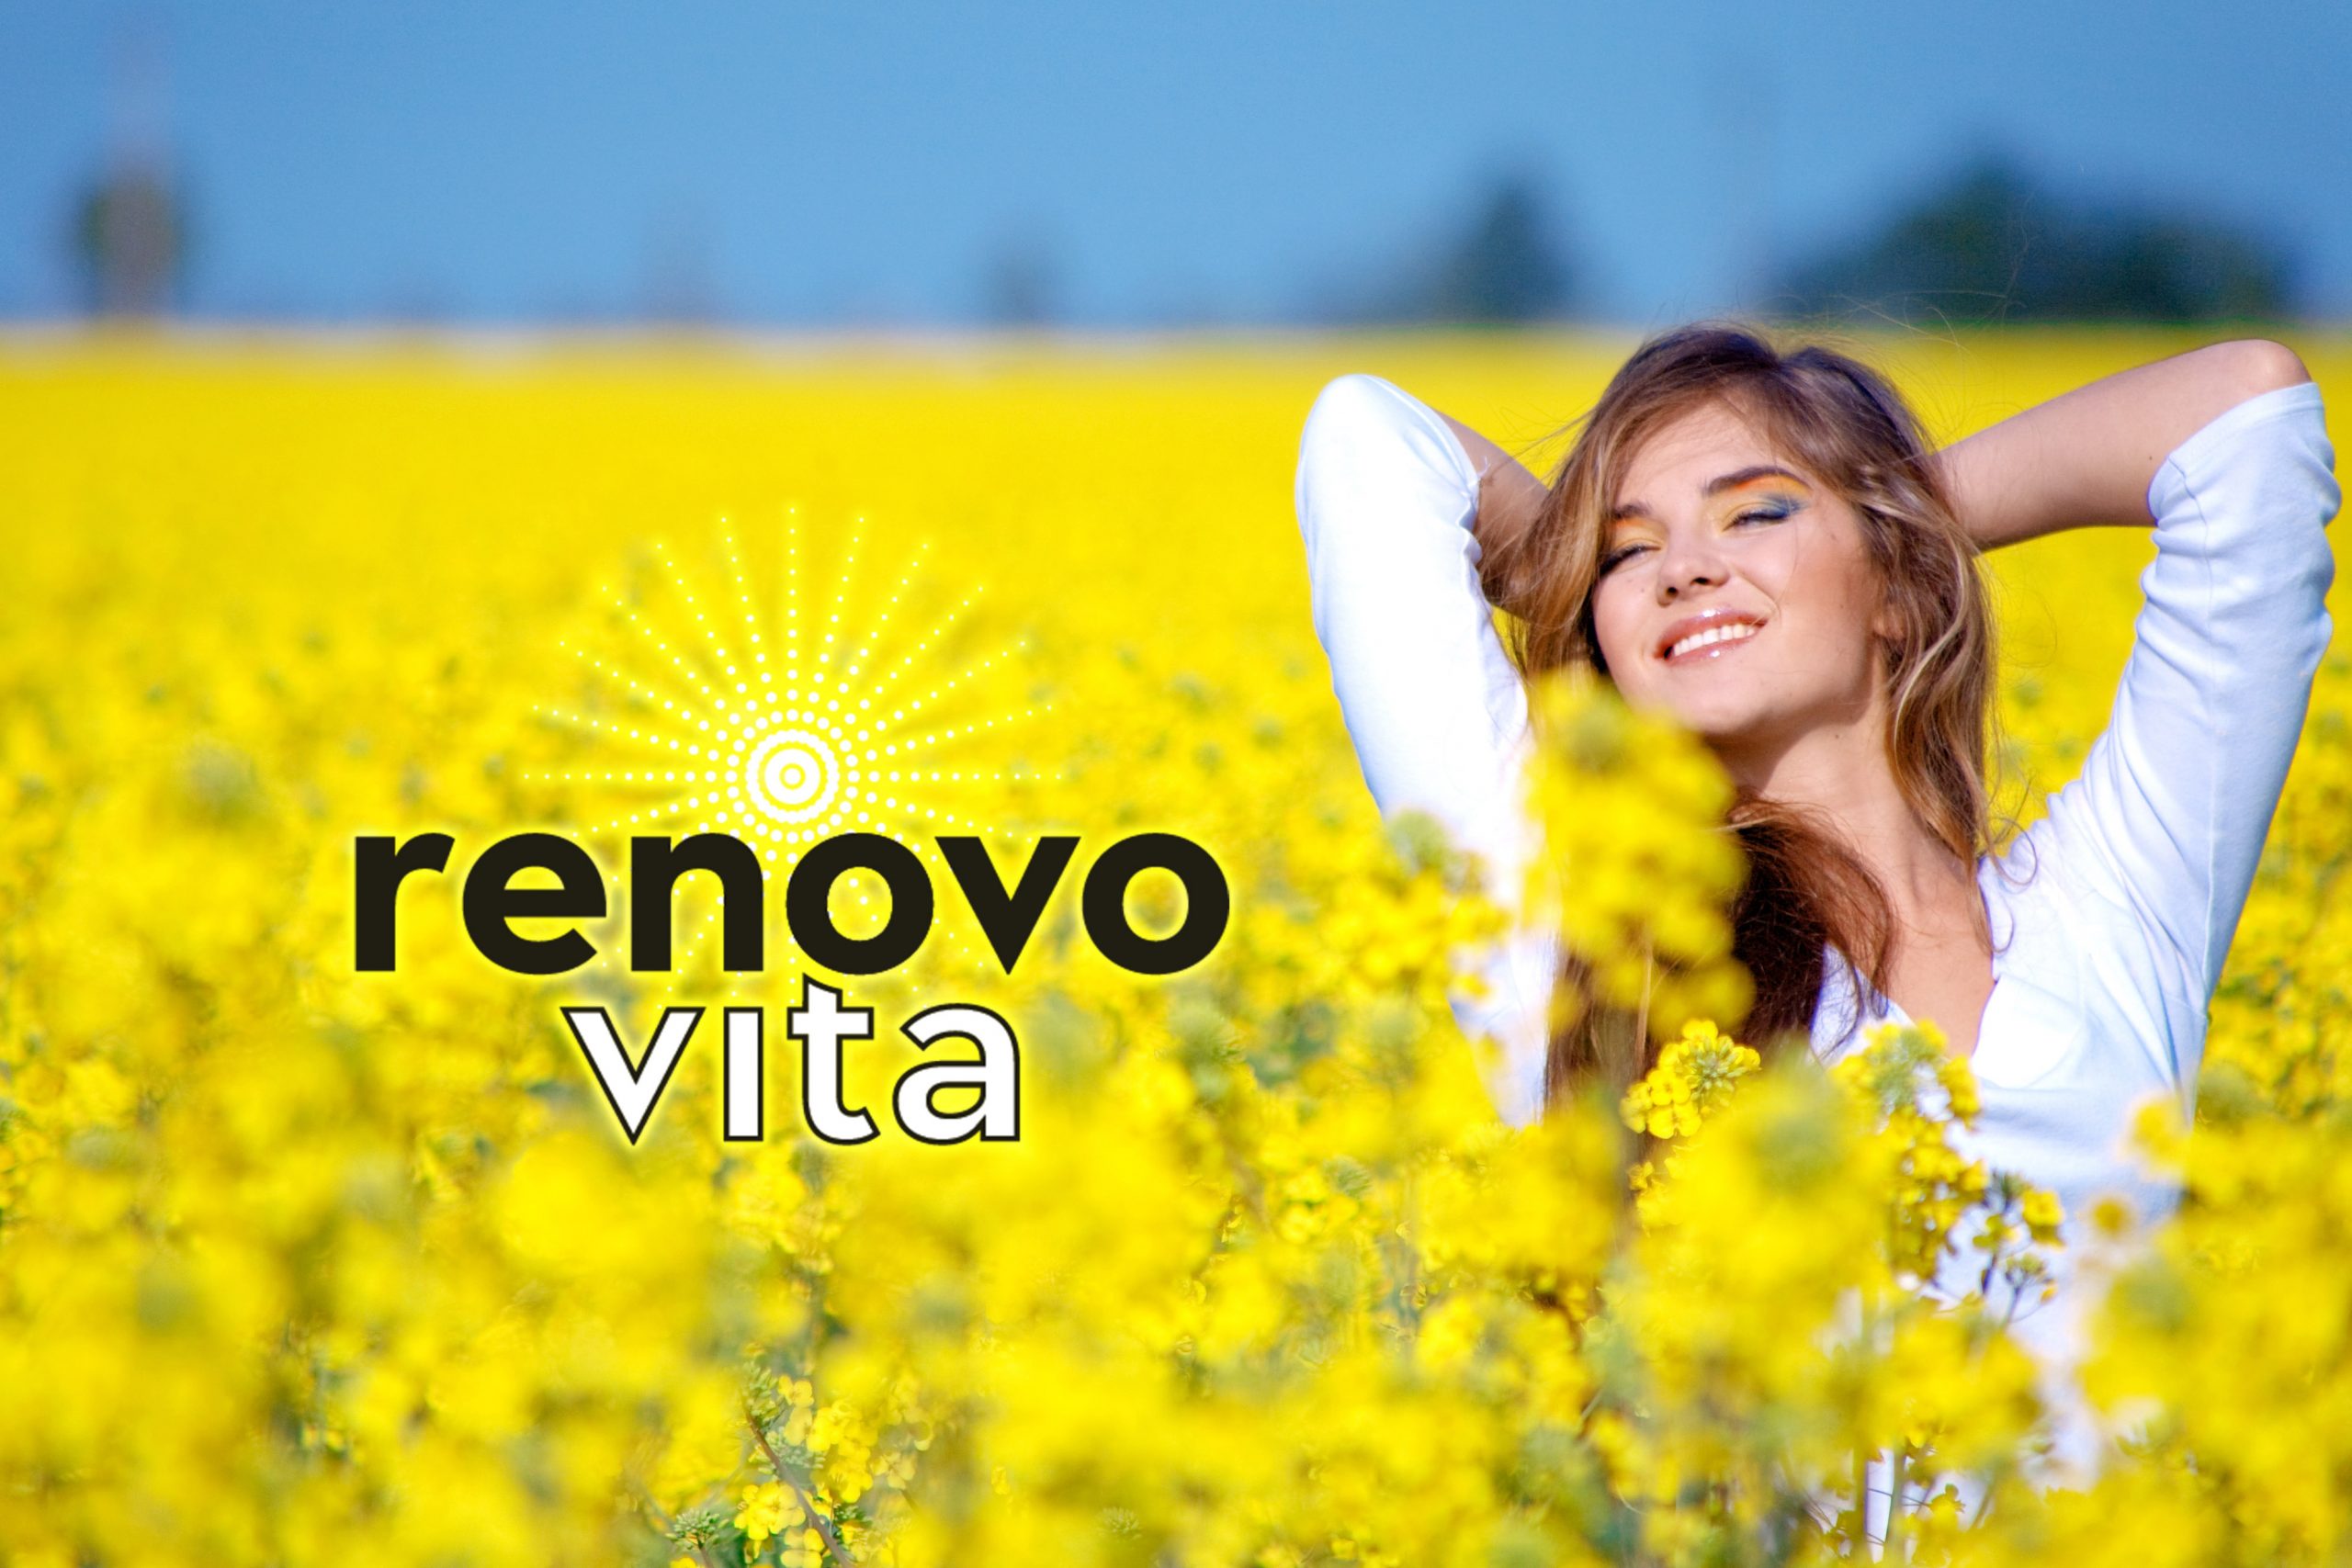 RenovoVita – A Company You Can Be Proud to Be Associated With